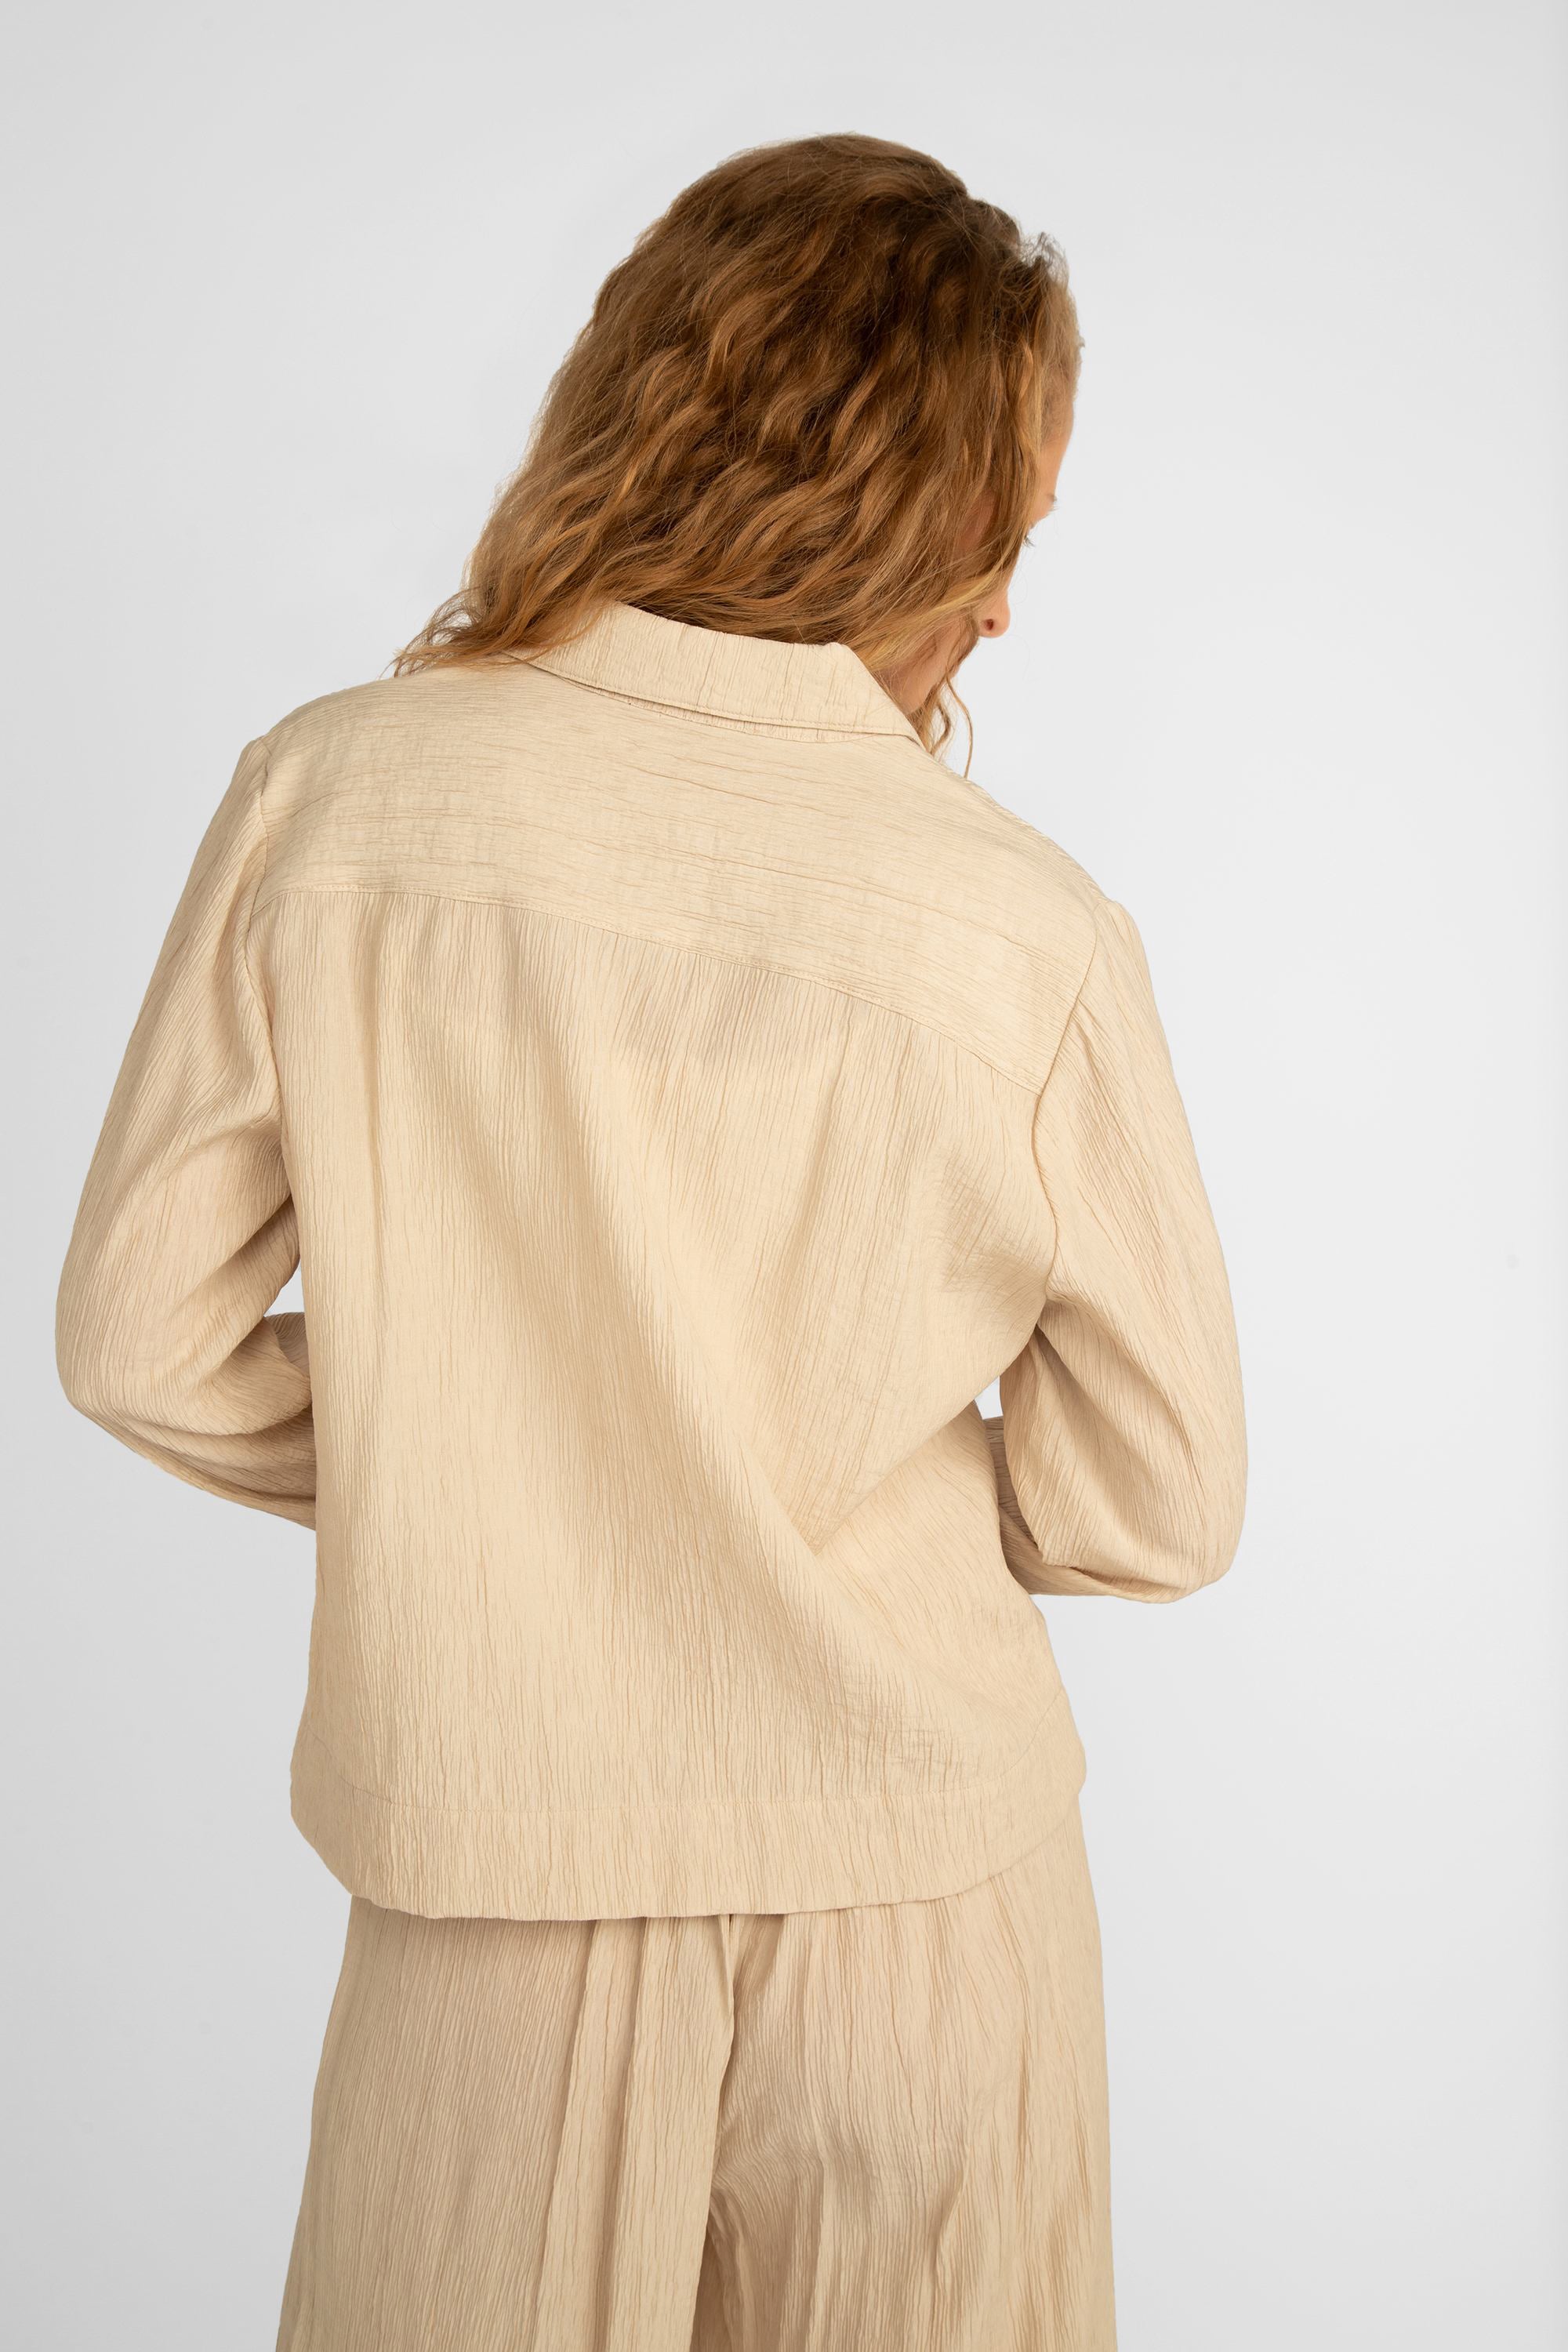 Back view of Picadilly (JM581) Women's Long Sleeve Button Front Textured Viscose Jacket in Milk Tea Beige